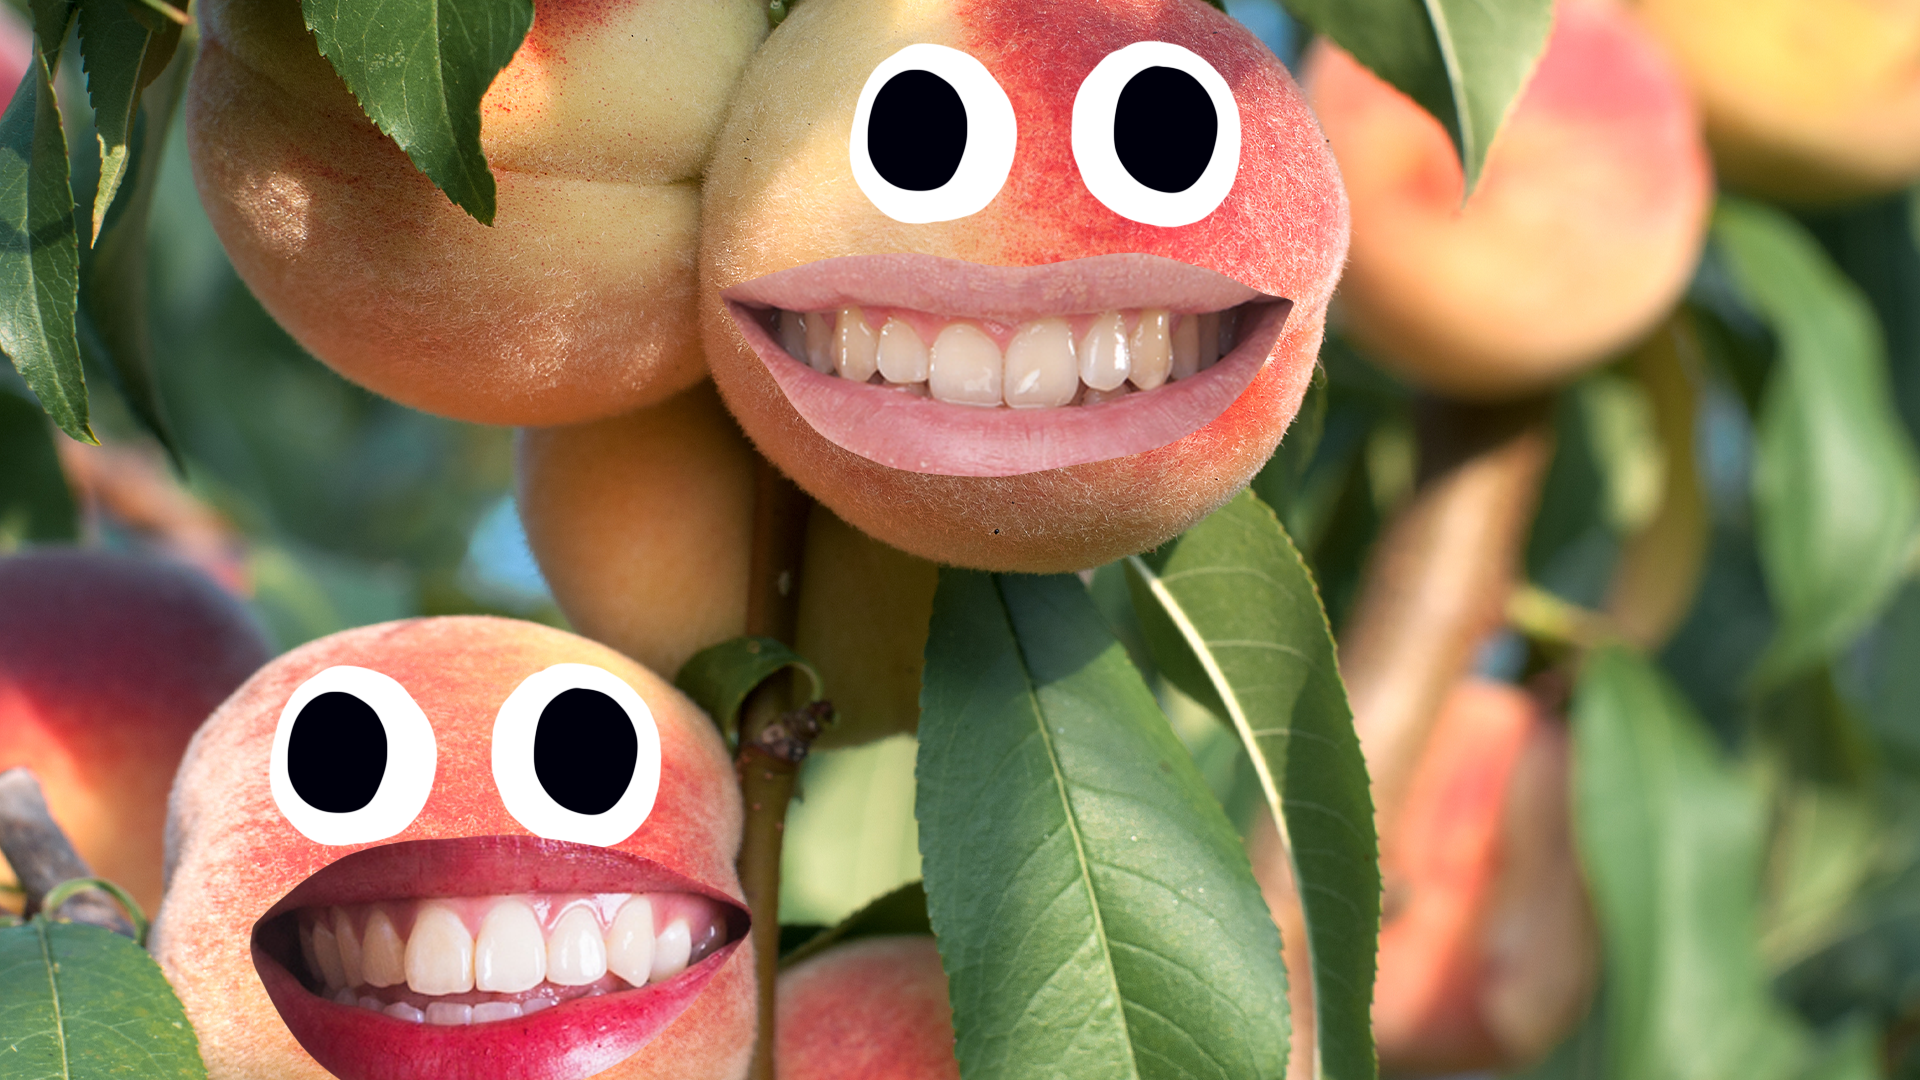 Some peaches with goofy faces